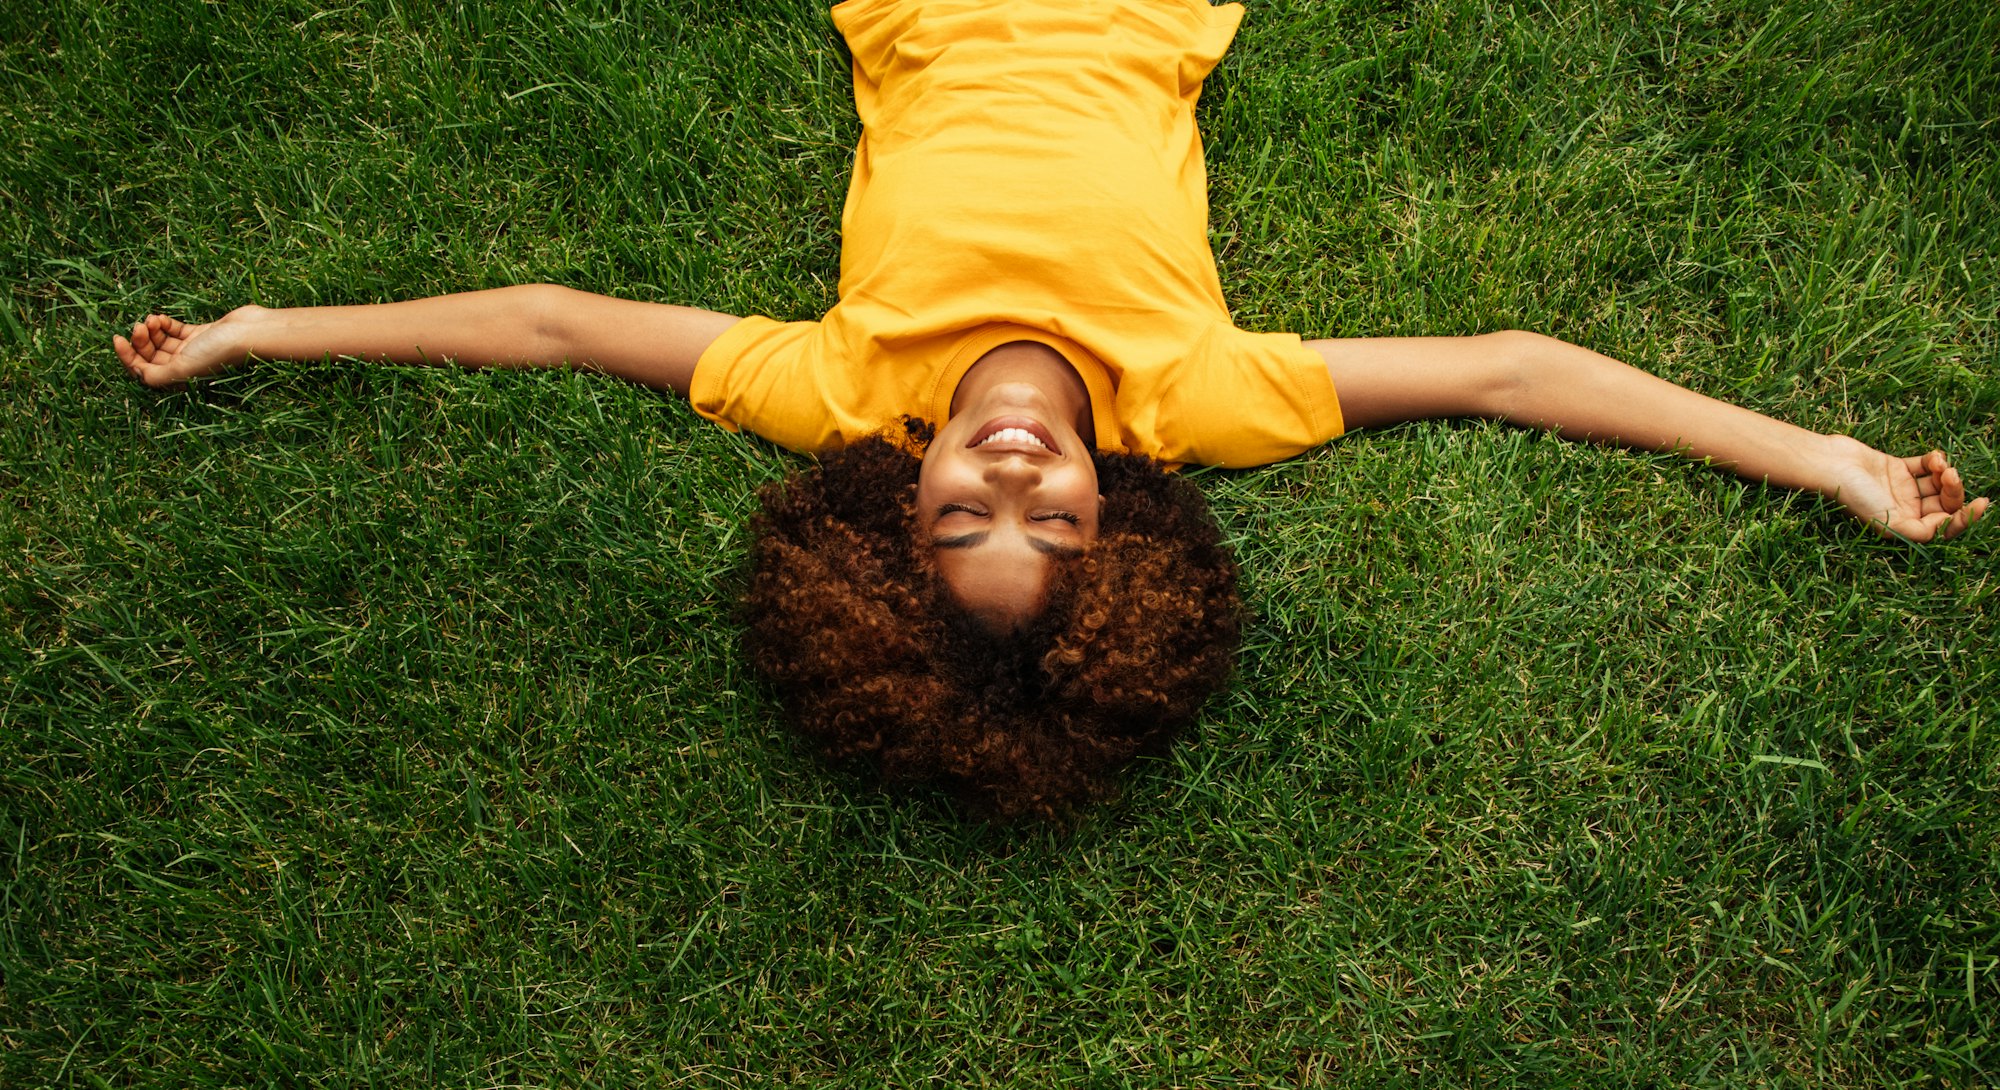 A woman lies in the grass. cancer season 2022 do's and don'ts.